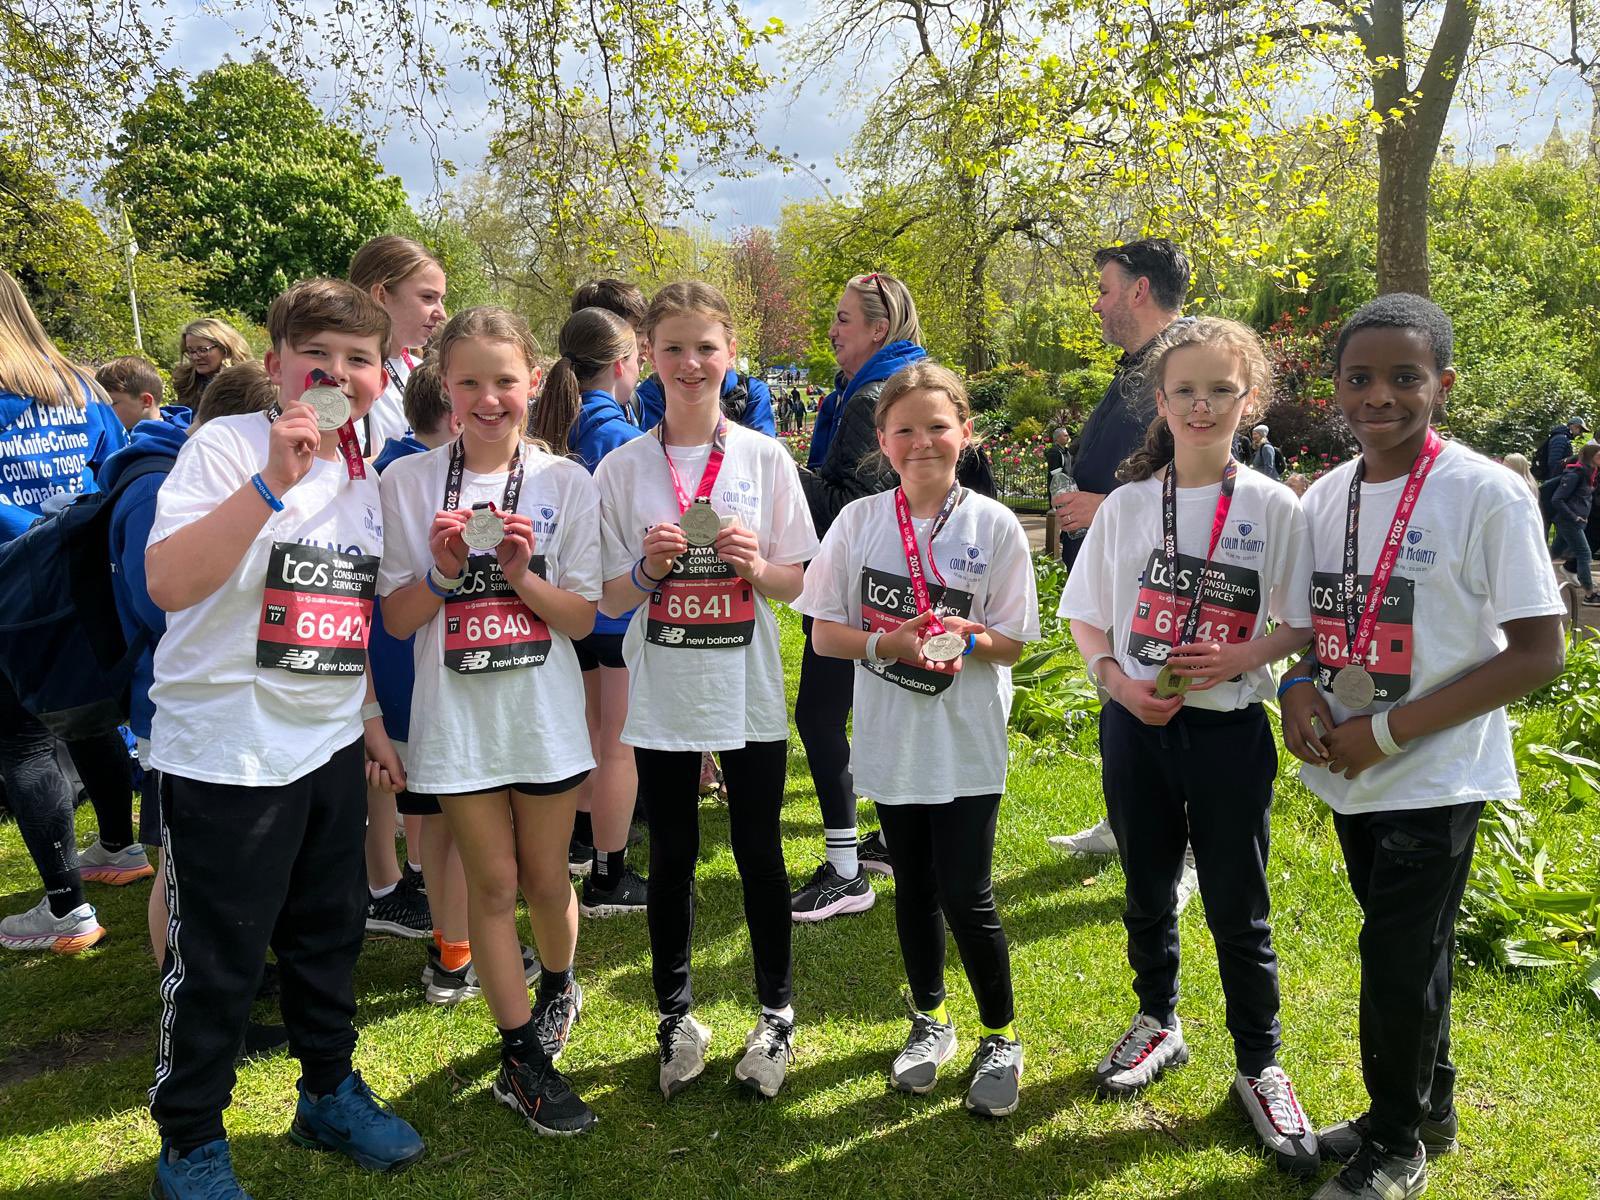 Children across Sefton donned their running gear and clocked up hundreds of miles as they raised money for the kNOw Knife Crime campaign and Knifesavers